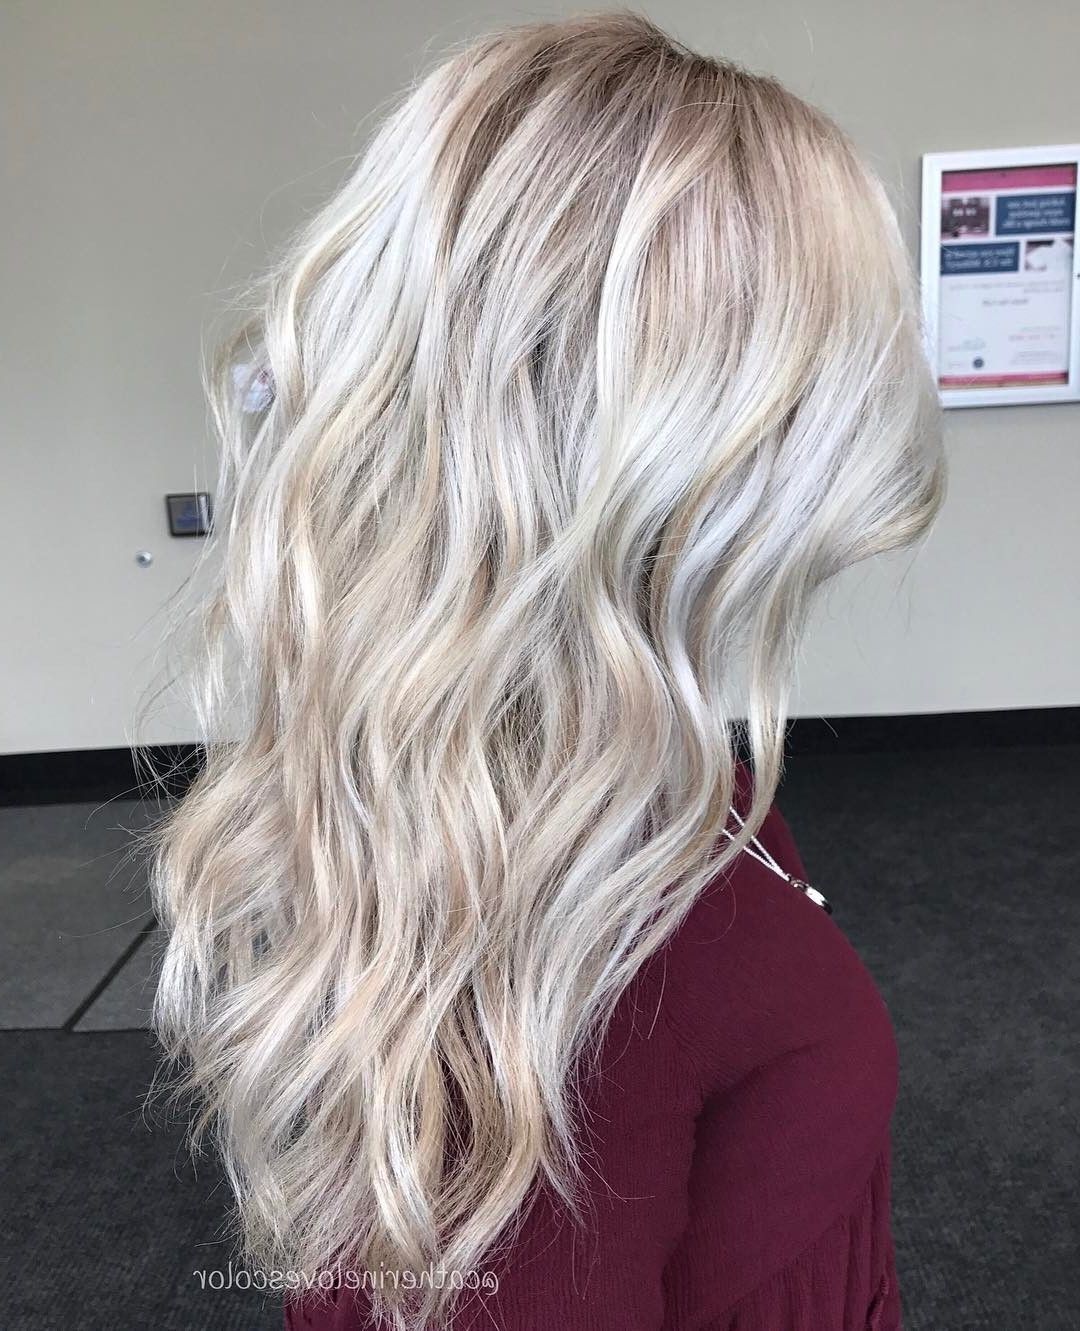 Most Recently Released Layered Bright And Beautiful Locks Blonde Hairstyles Throughout 20 Adorable Ash Blonde Hairstyles To Try: Hair Color Ideas  (View 6 of 20)